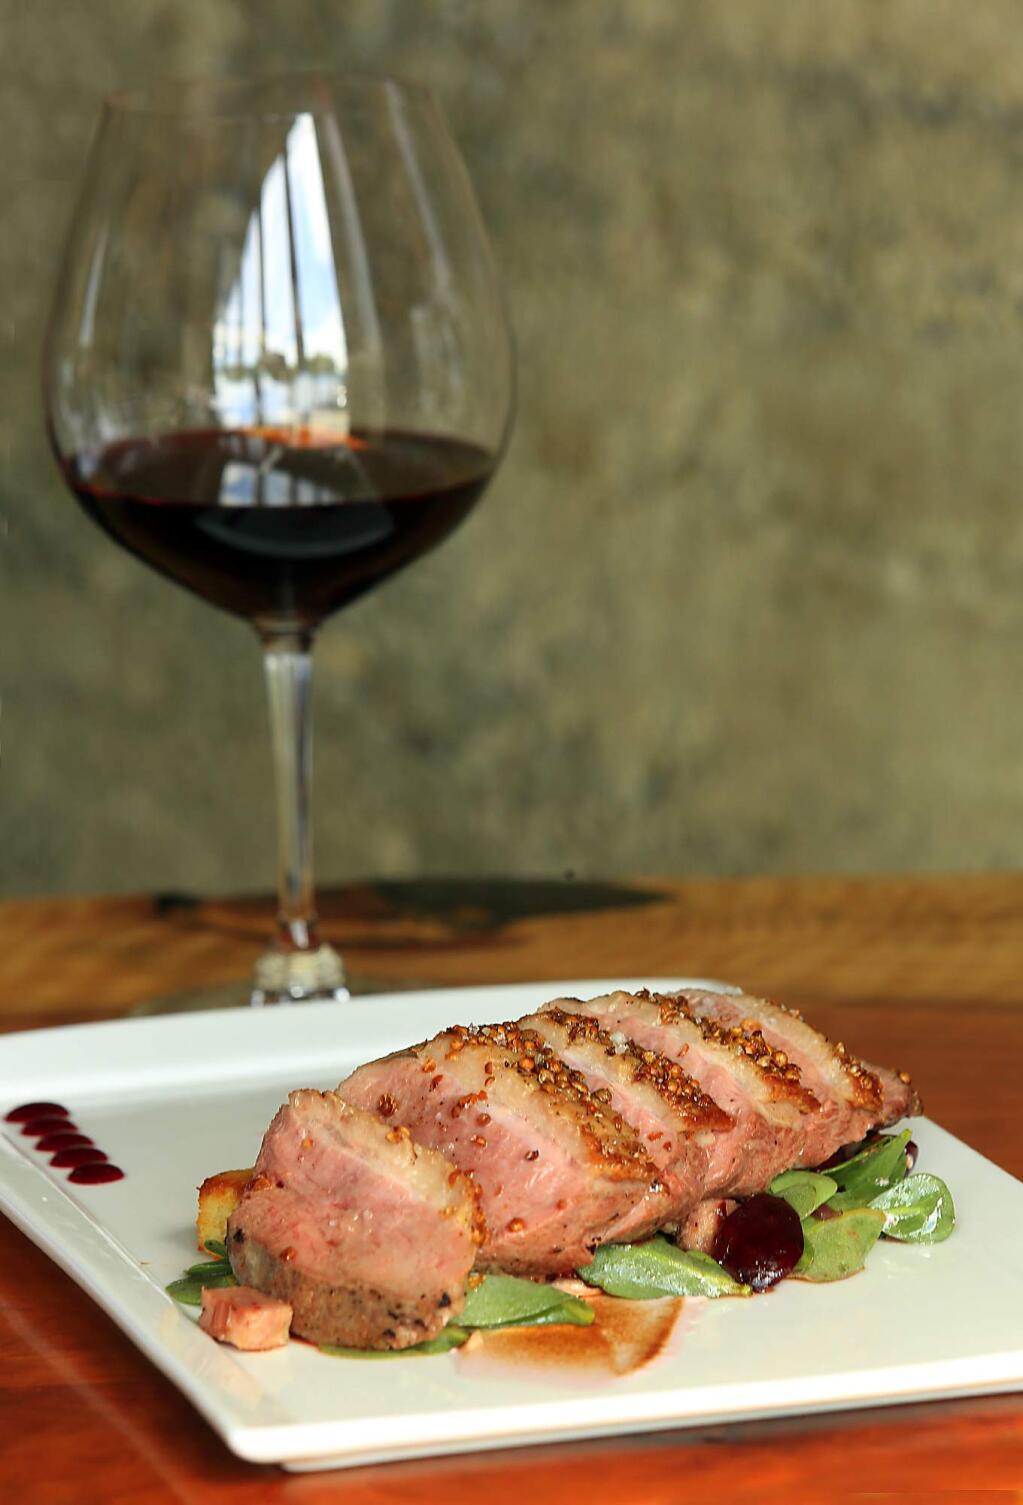 Coriander Crusted Duck Breast on cured duck leg and almond cake with cherry jus by chef Dustin Valette at Valette Healdsburg. (JOHN BURGESS / The Press Democrat)